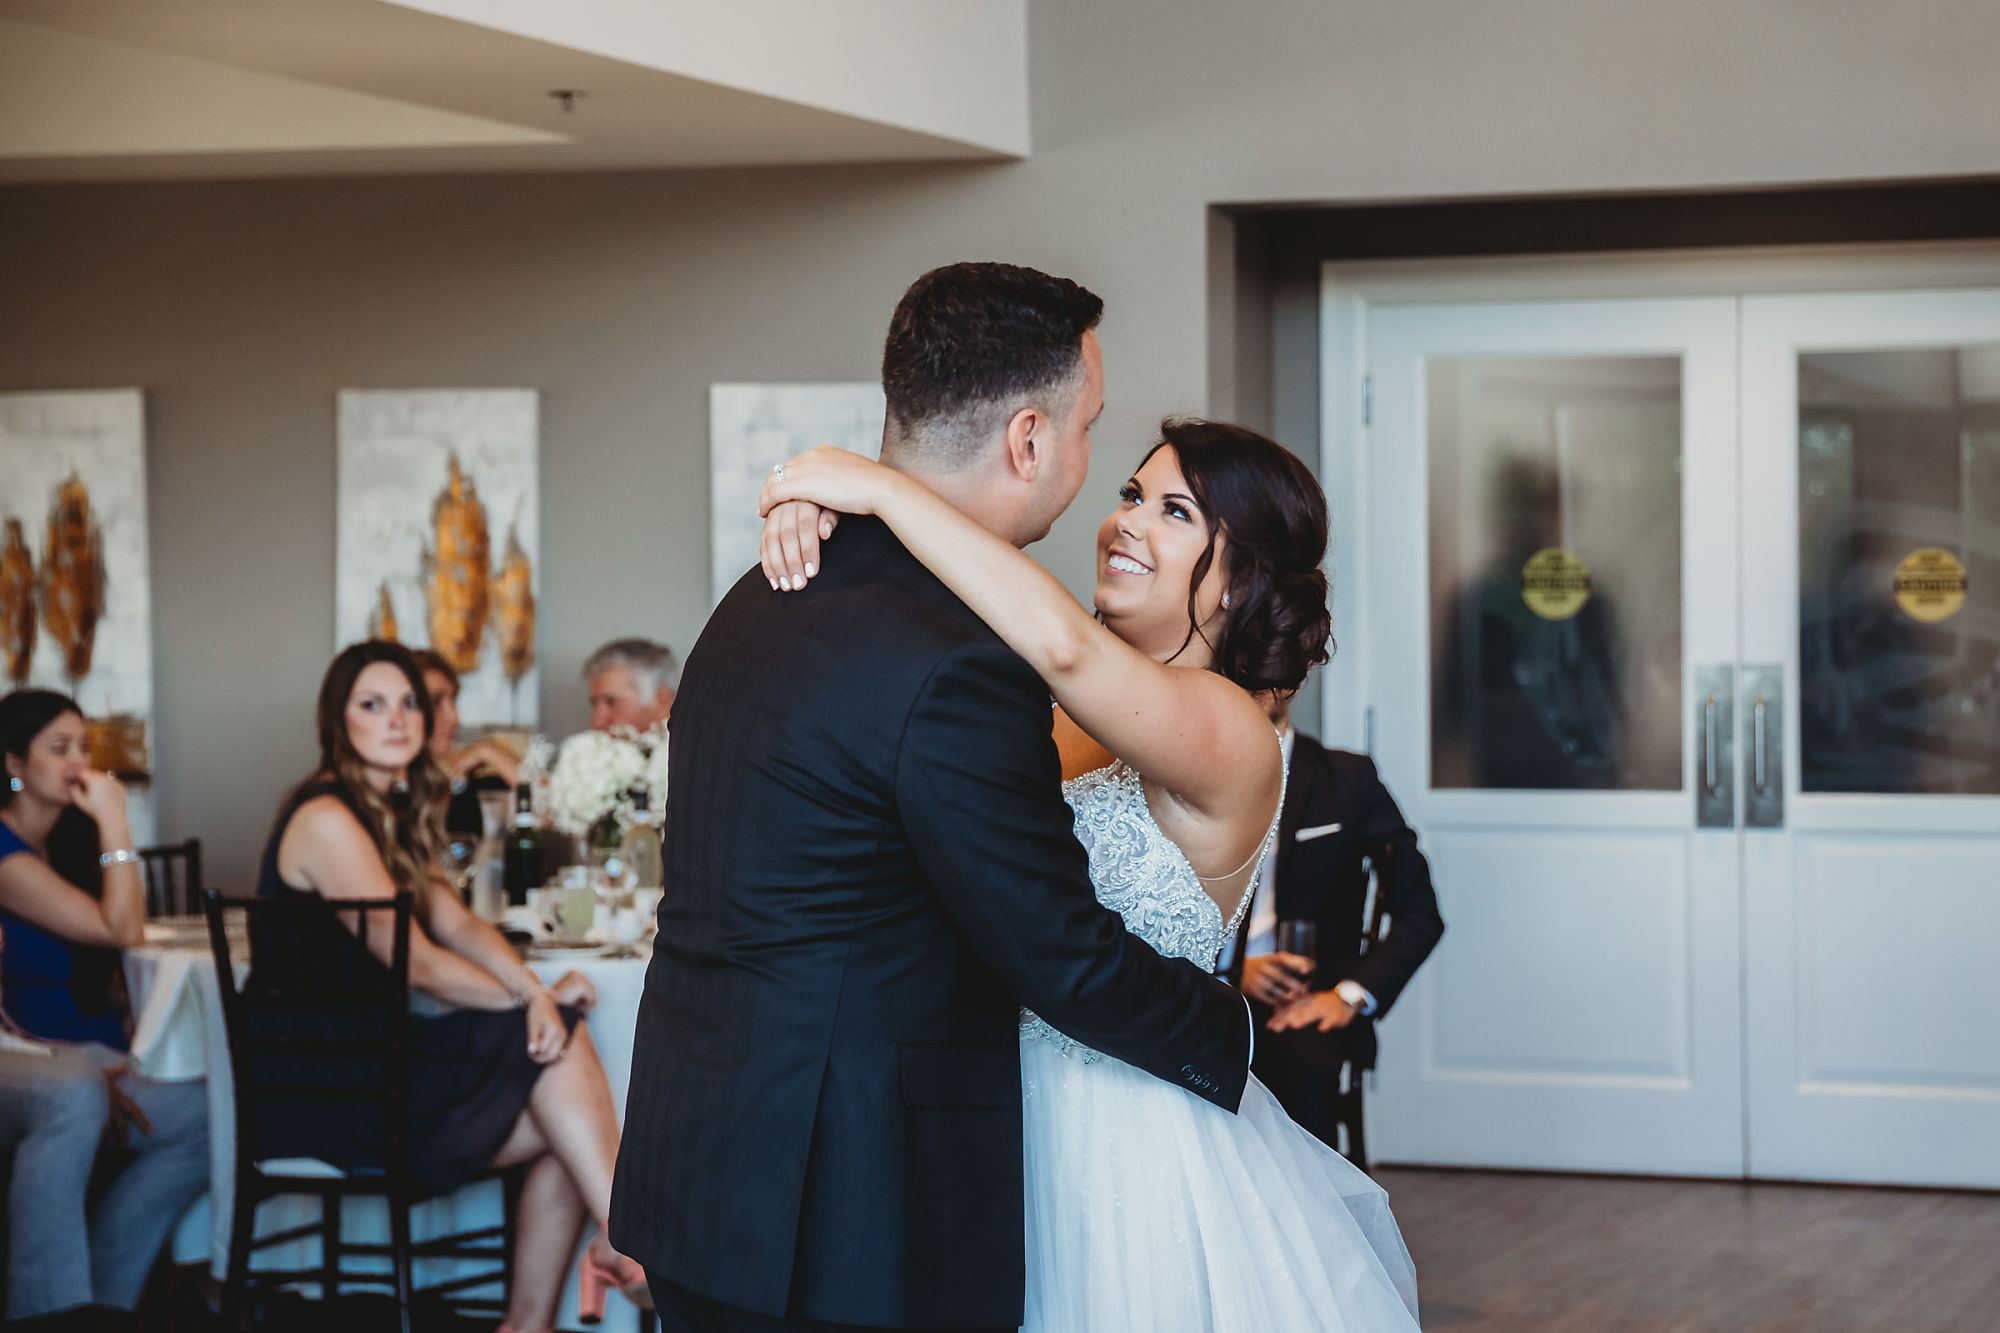 The bride and grooms first dance at Dundas Golf and Curling Club in Hamilton, Ontario.